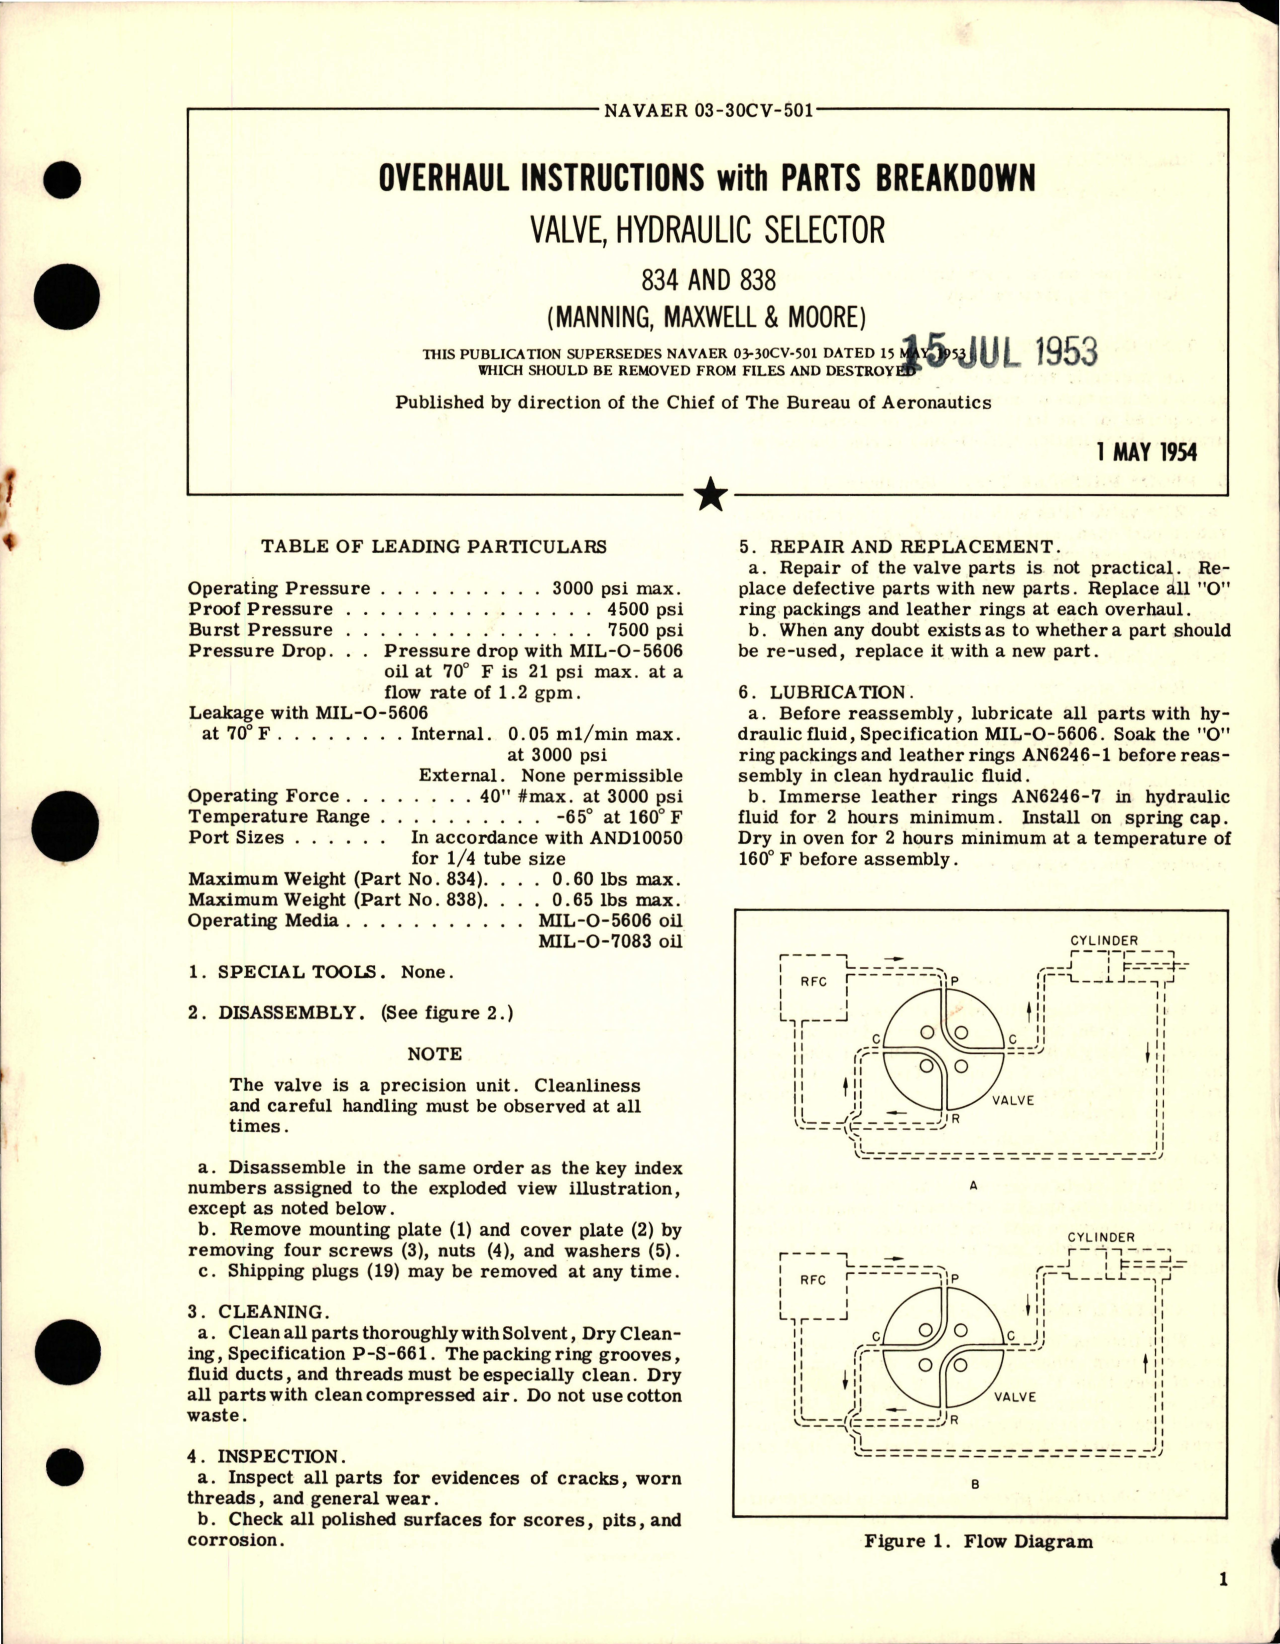 Sample page 1 from AirCorps Library document: Overhaul Instructions with Parts Breakdown for Hydraulic Selector Valve - 834, 838